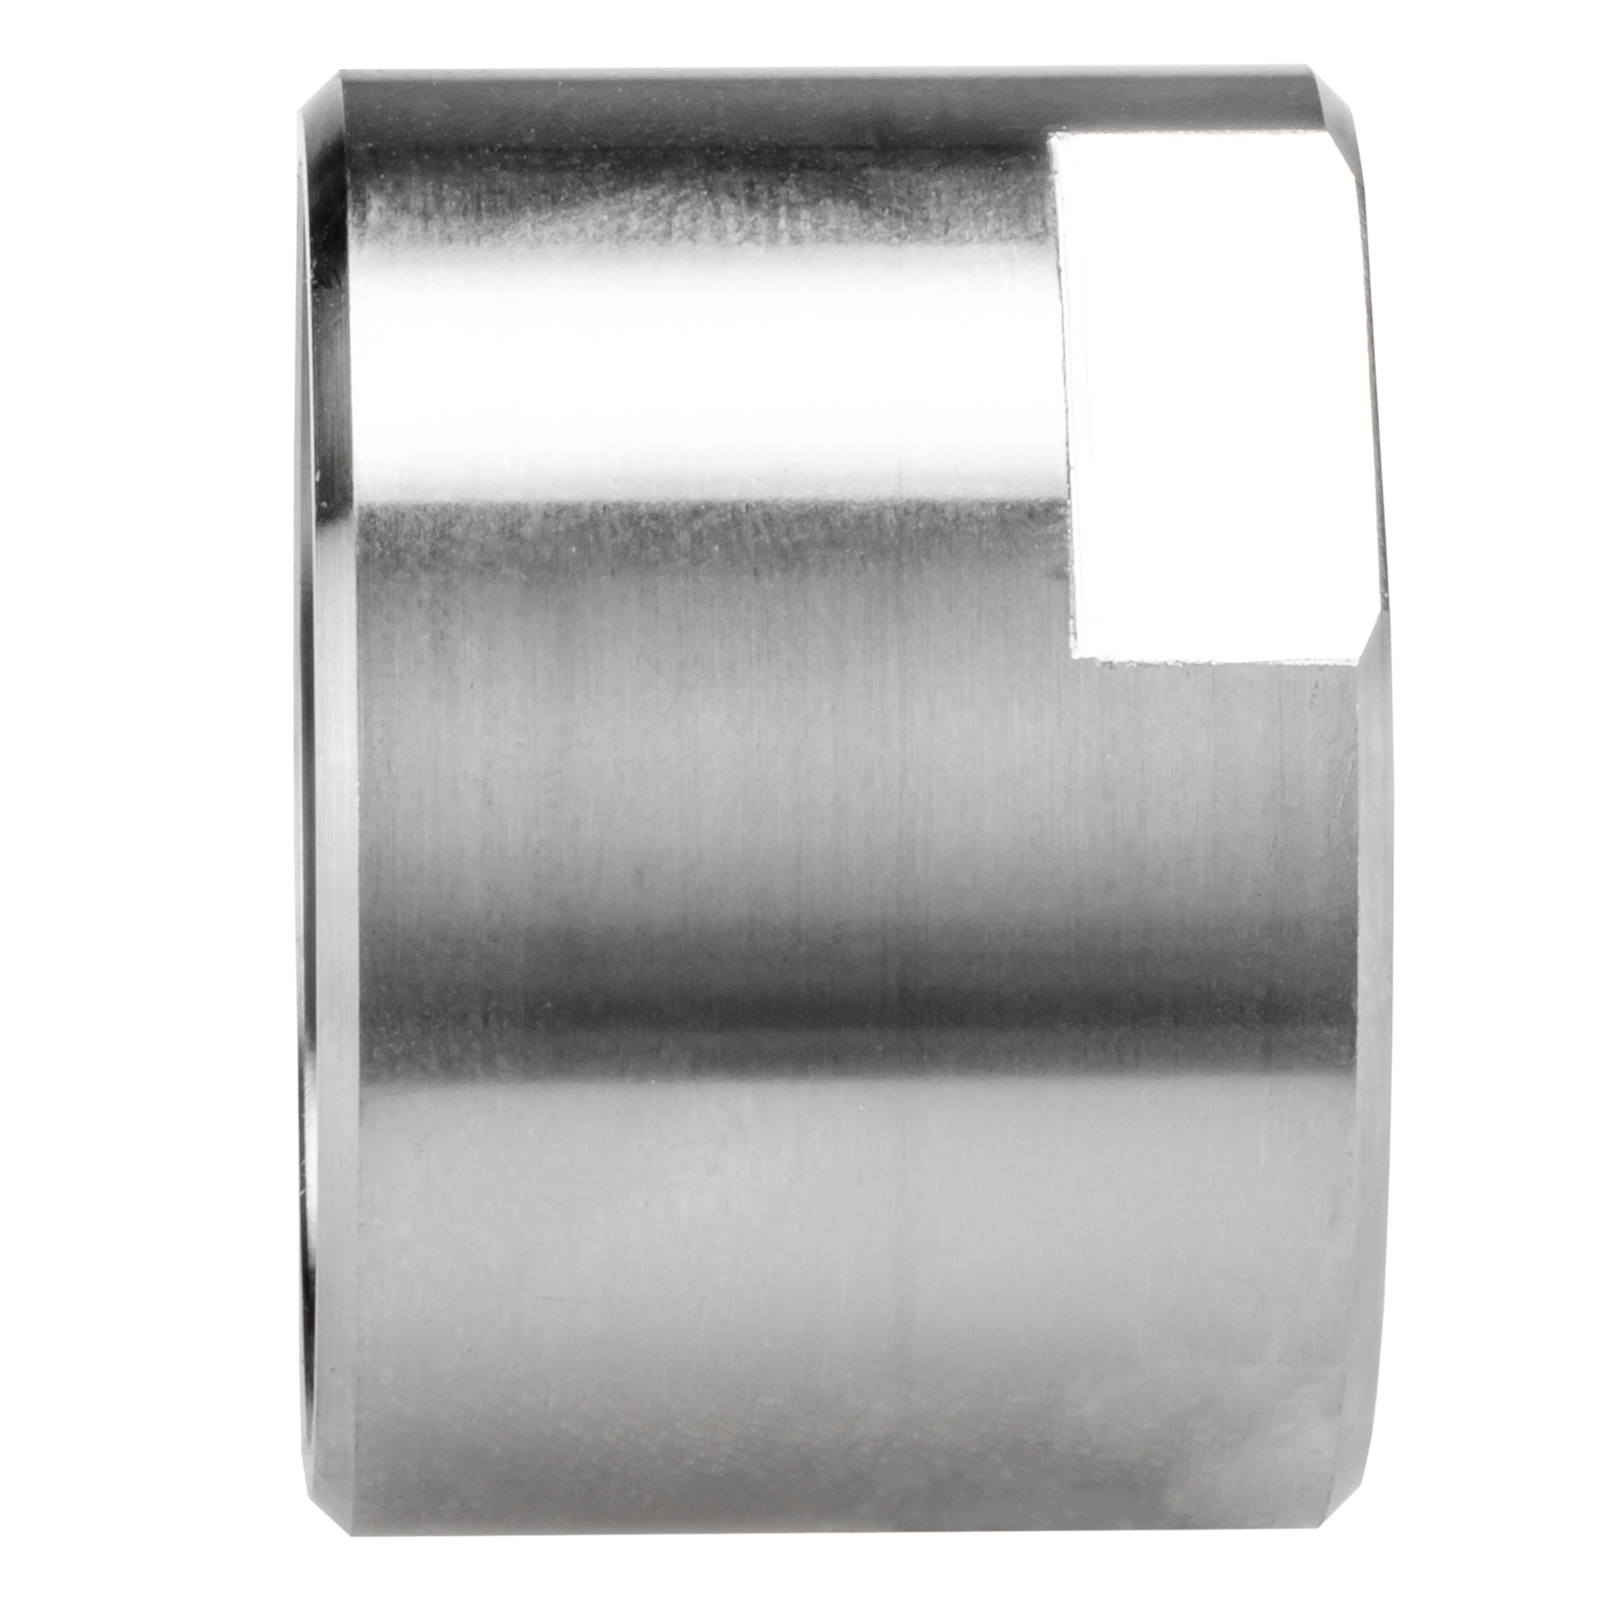 End Cap, Stainless Steel